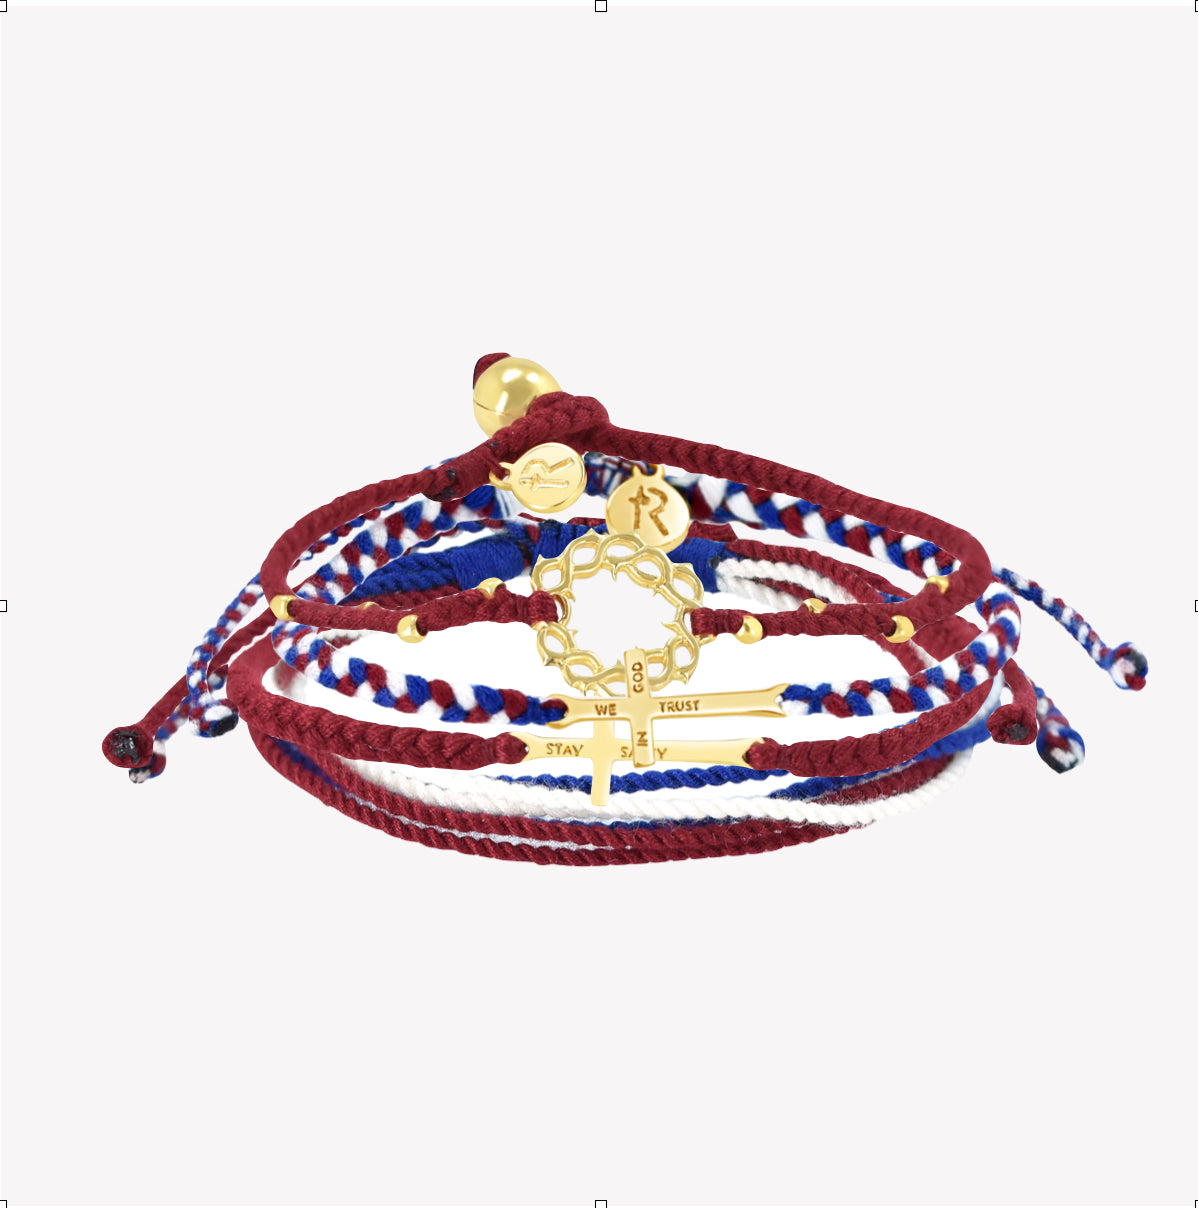 Rizen Jewelry Made 4 Ministries gold We Trust in God Bracelet Set. Featuring Red Garnet Beaded Crown of Thorns; Red, White, and Blue We Trust in God Cross bracelet; Garnet Red STAY SALTY braided bracelet; and peaceful Red, White, and Blue Be Magnified multi-cord bracelet. 